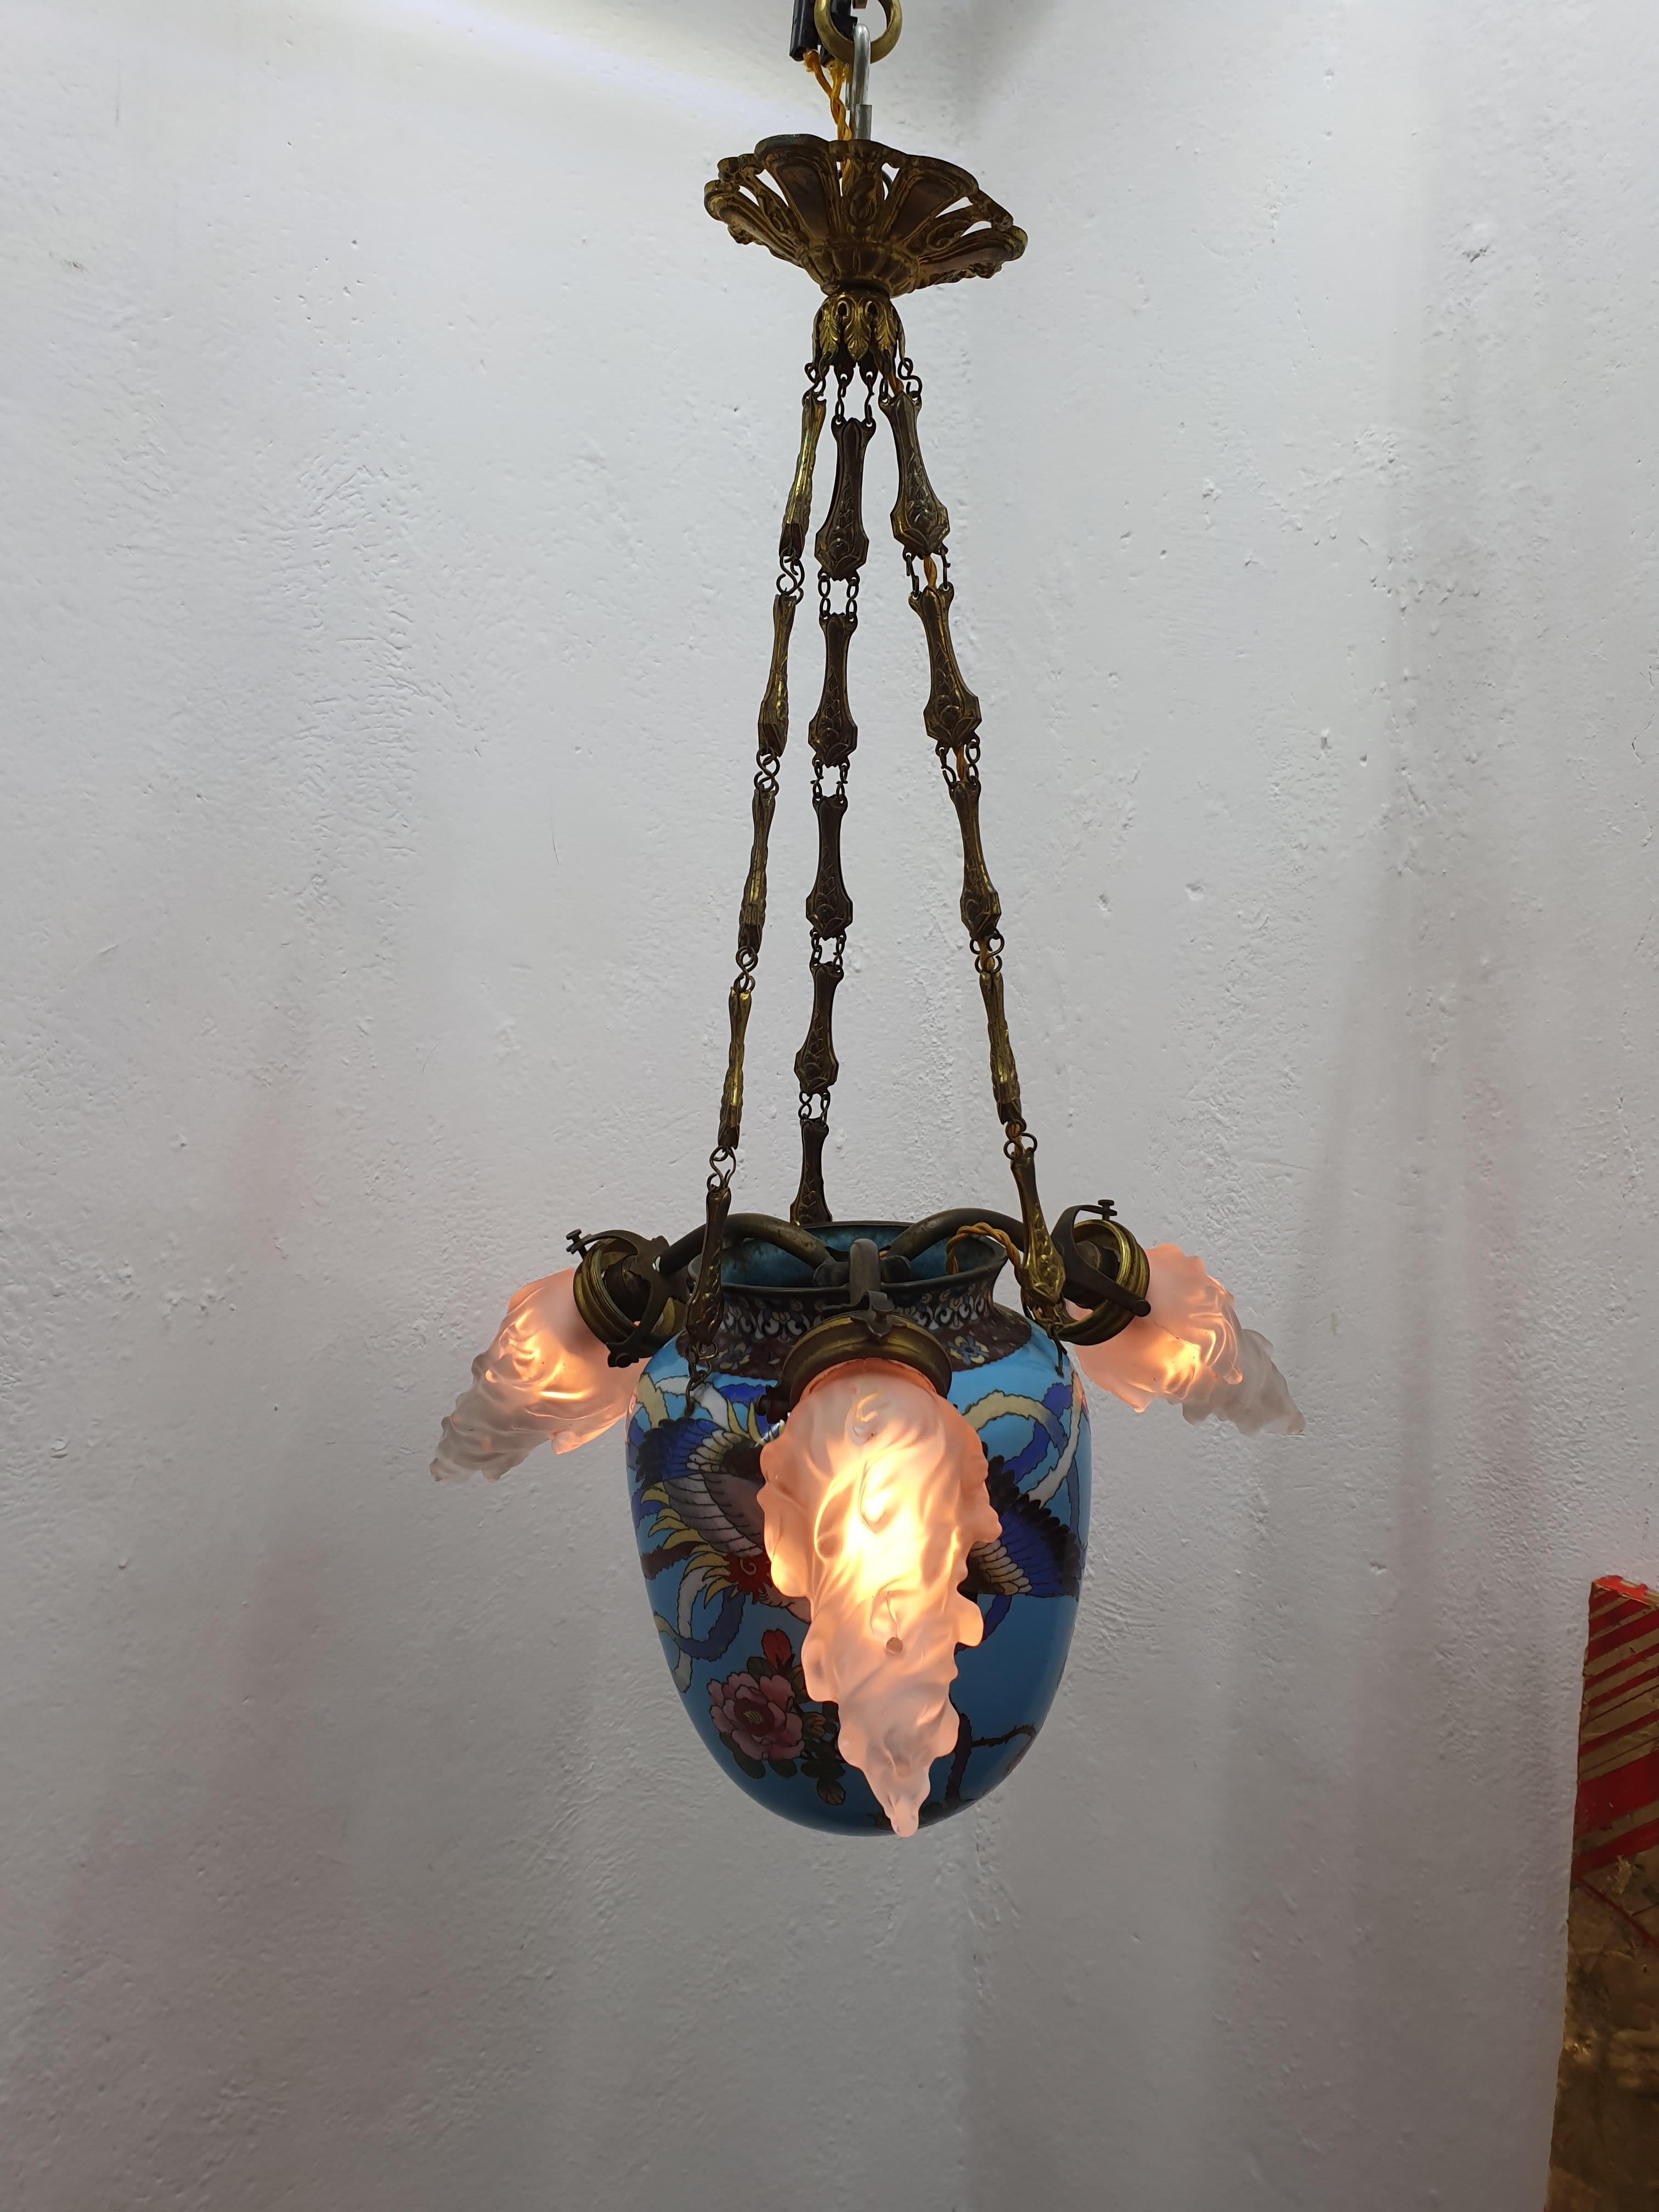 Beautiful Art Nouveau 3-light chandelier, made in France, circa 1910s.
This chandelier consists of brass hardware, 3 moulded 